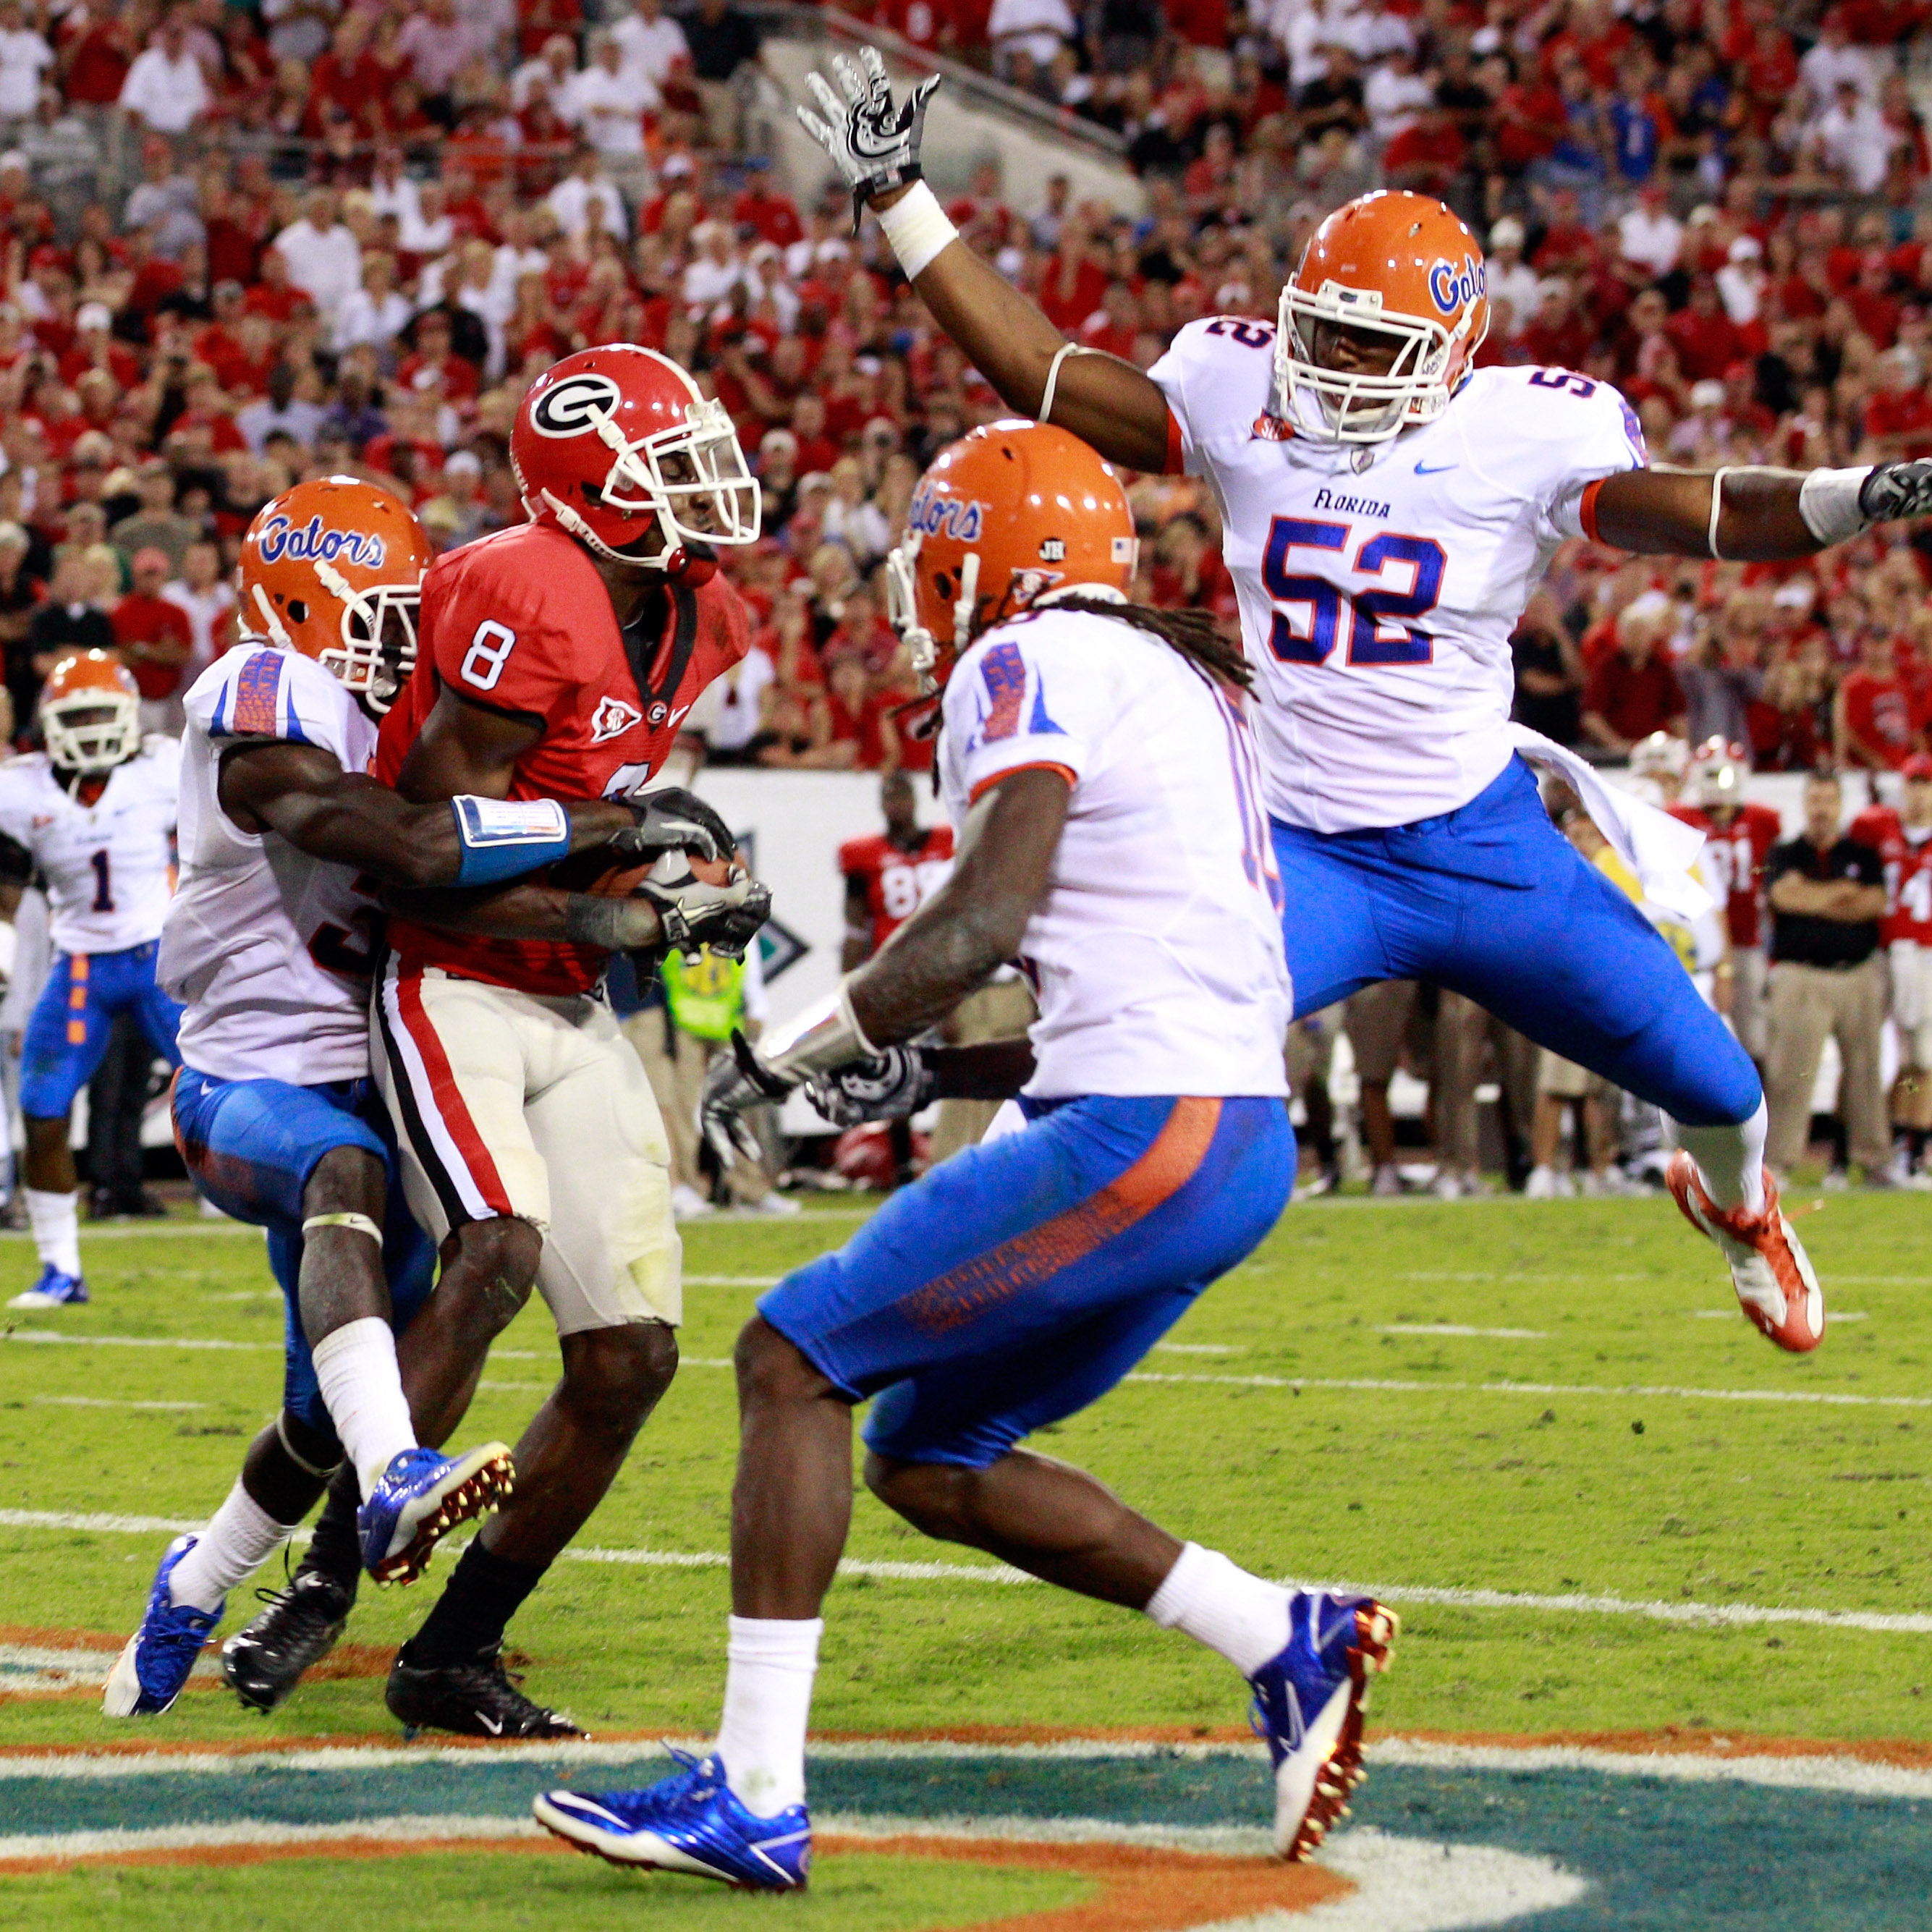 JACKSONVILLE, FL - OCTOBER 30:  A.J. Green #8 of the Georgia Bulldogs catches a pass for a touchdown against Jonathan Bostic #52 of the Florida Gators during the game at EverBank Field on October 30, 2010 in Jacksonville, Florida.  (Photo by Sam Greenwood